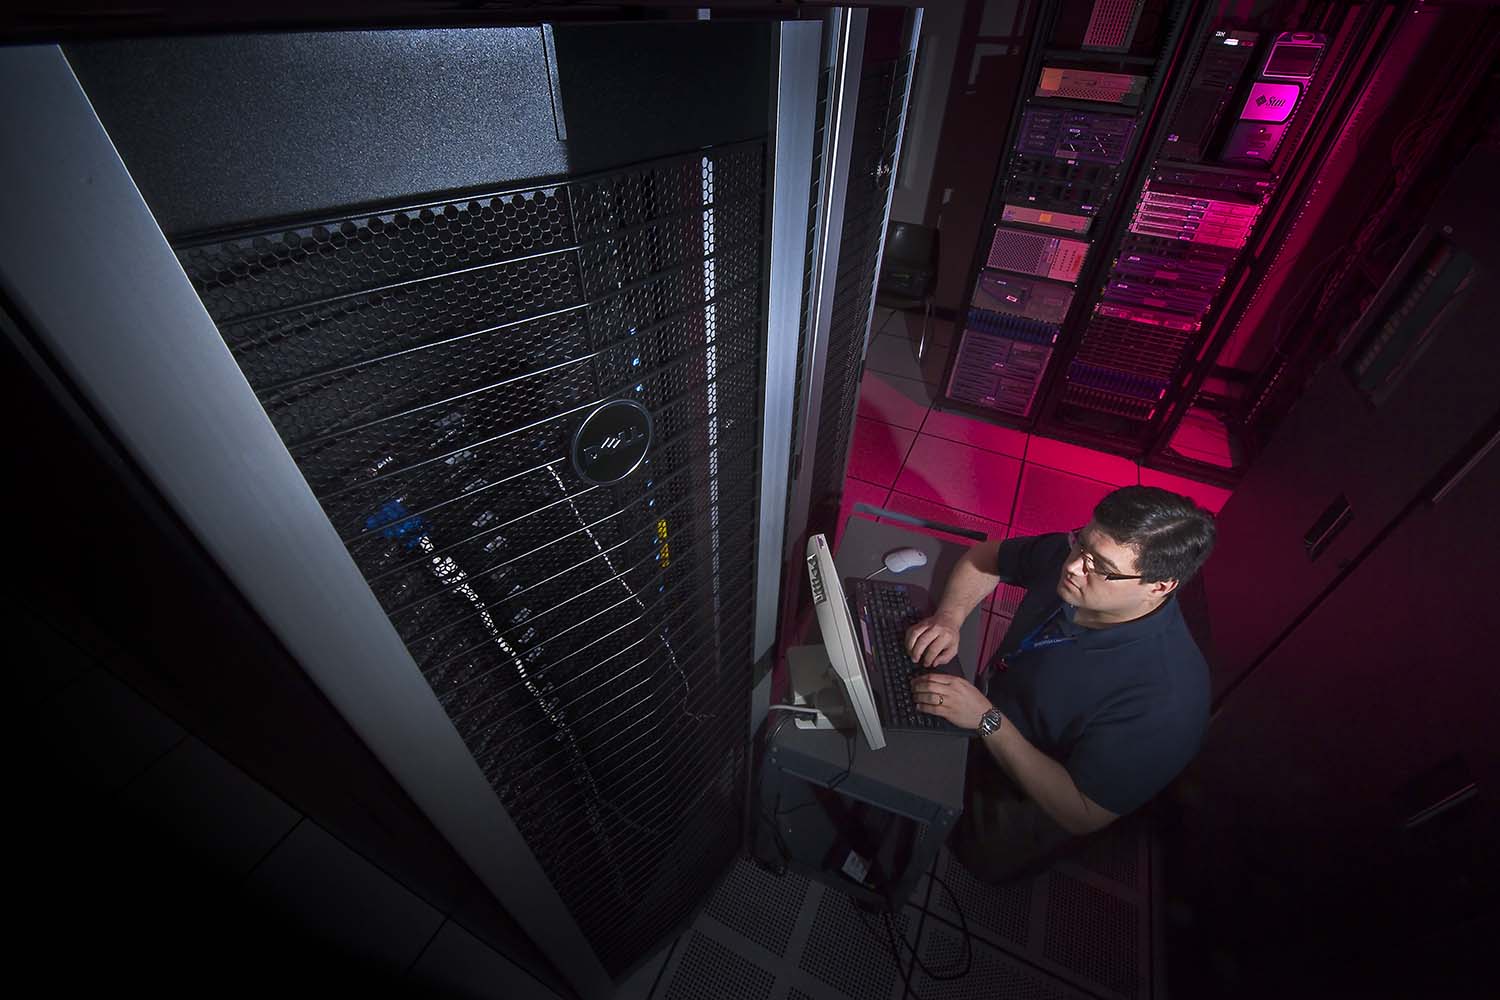 Performing diagnostics on the supercomputer cluster.